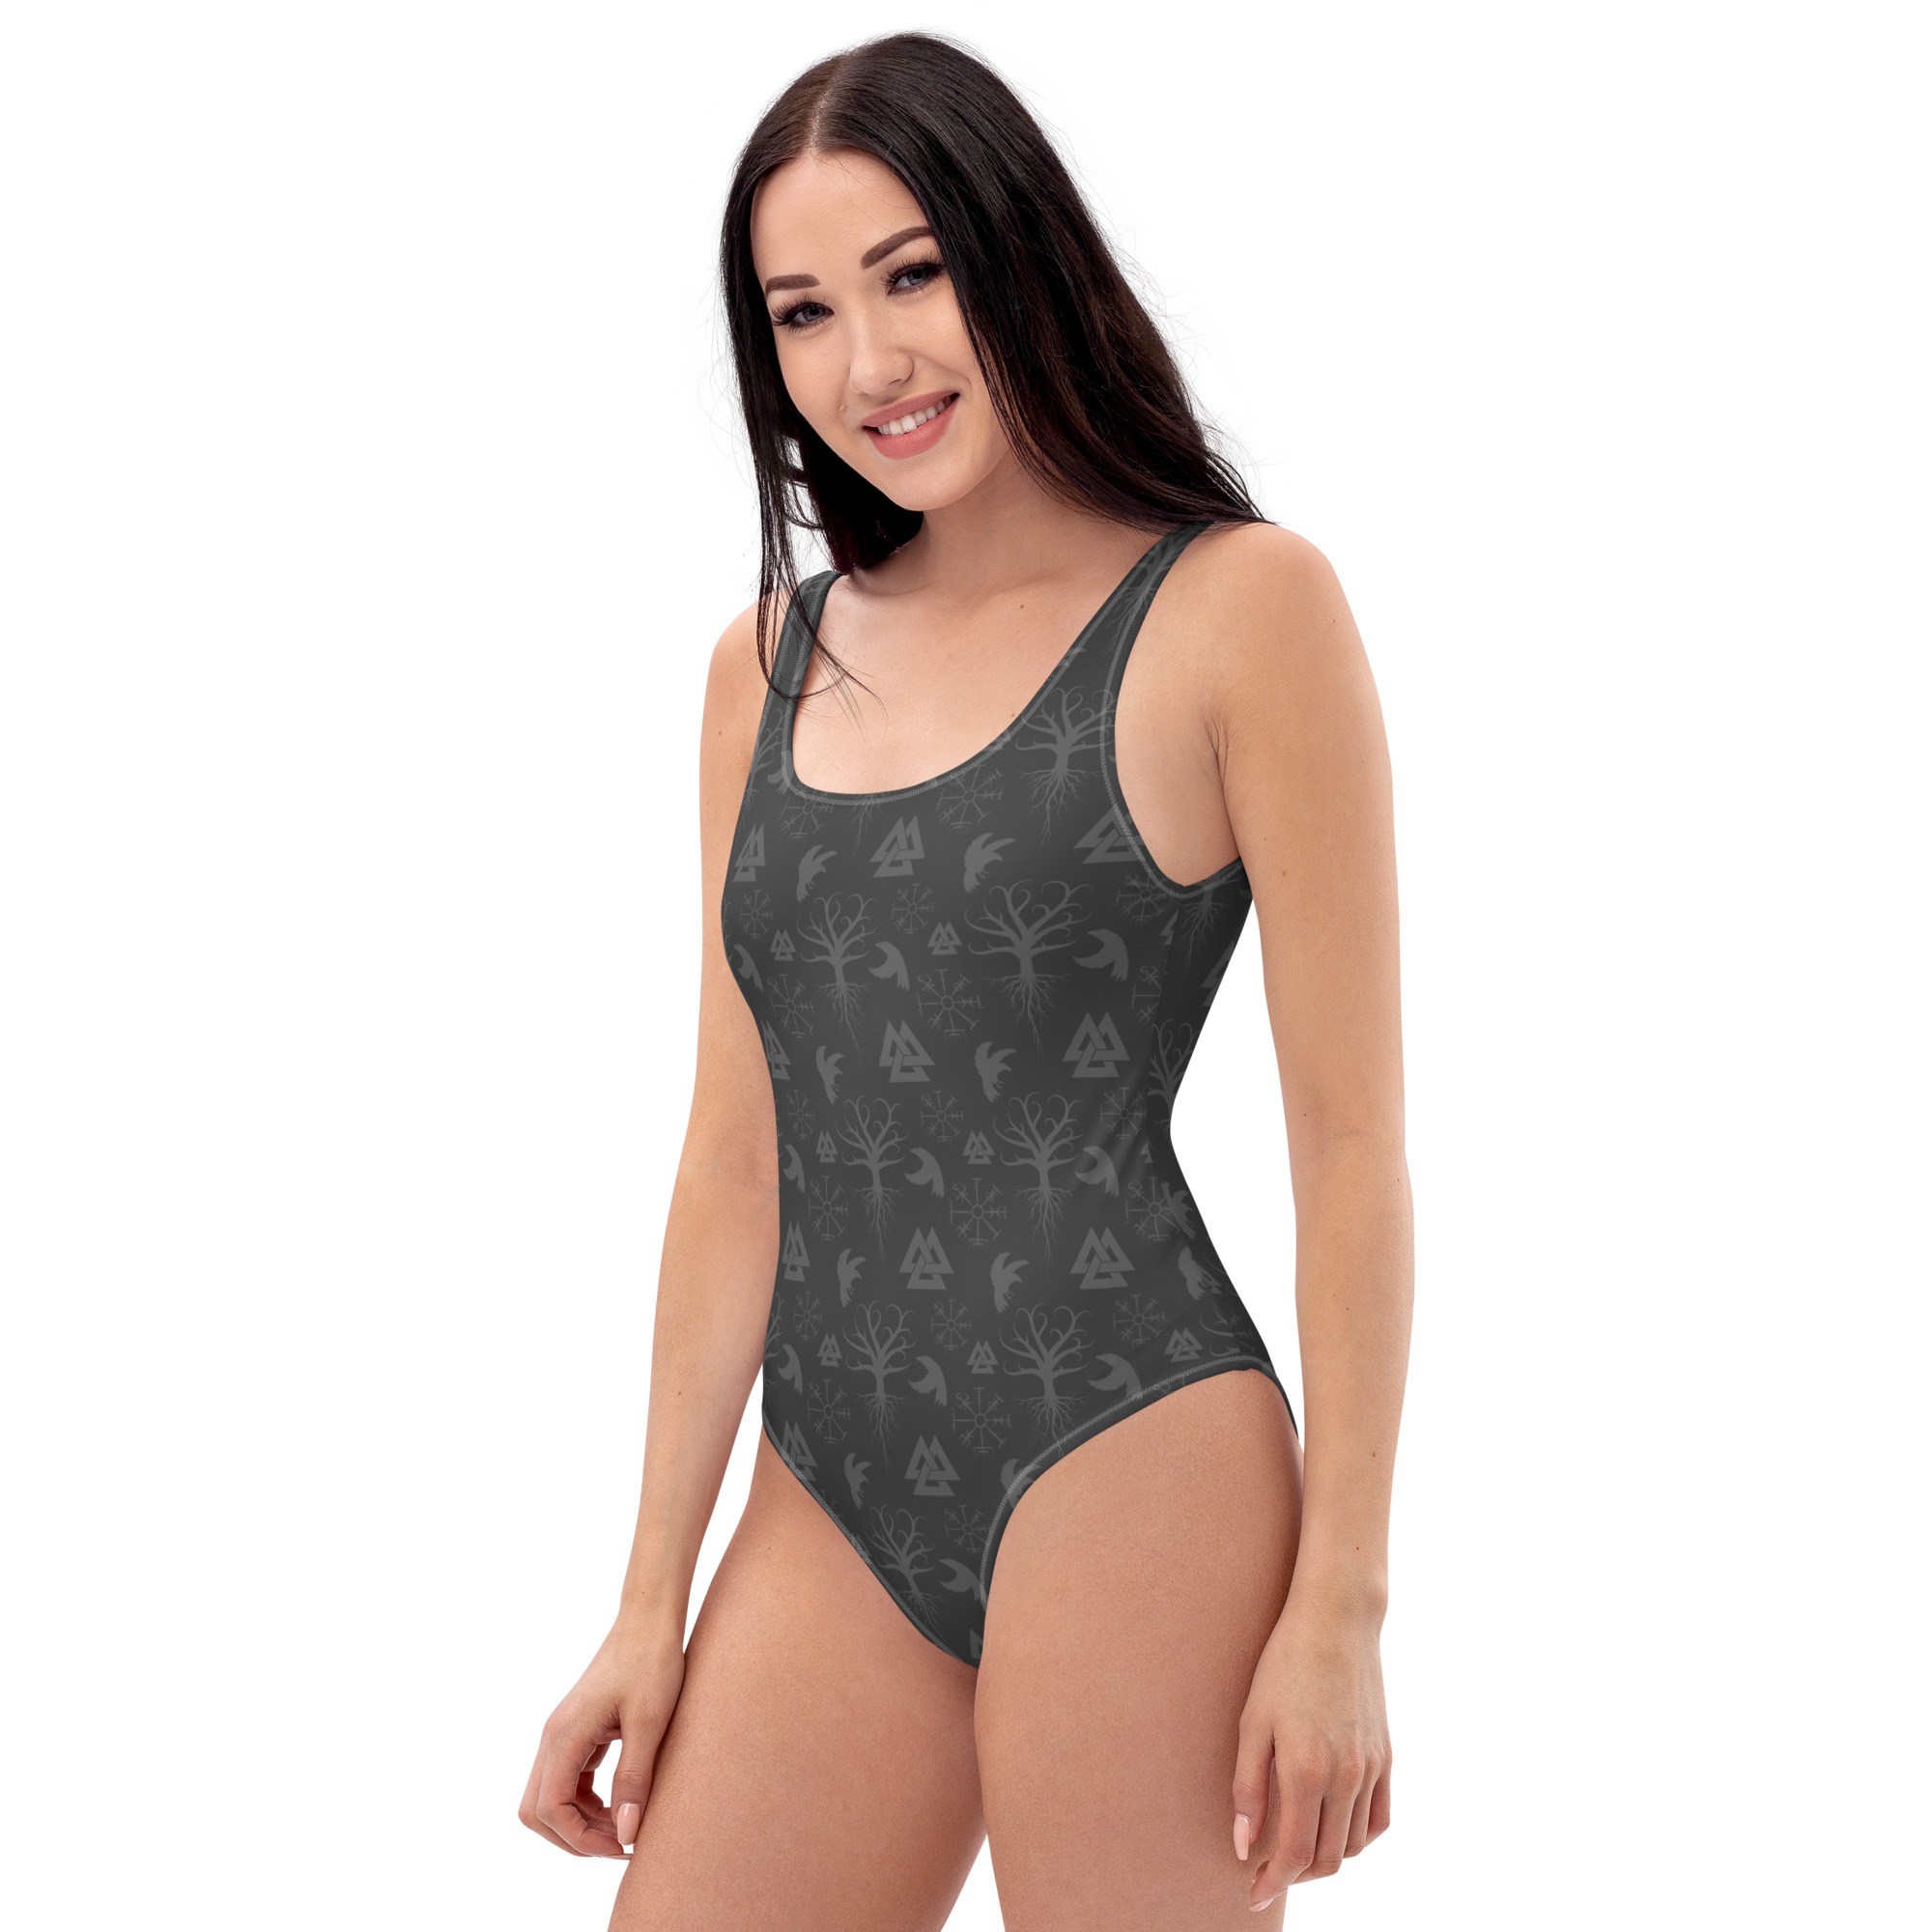 Gray Norse Symbols One-Piece Swimsuit